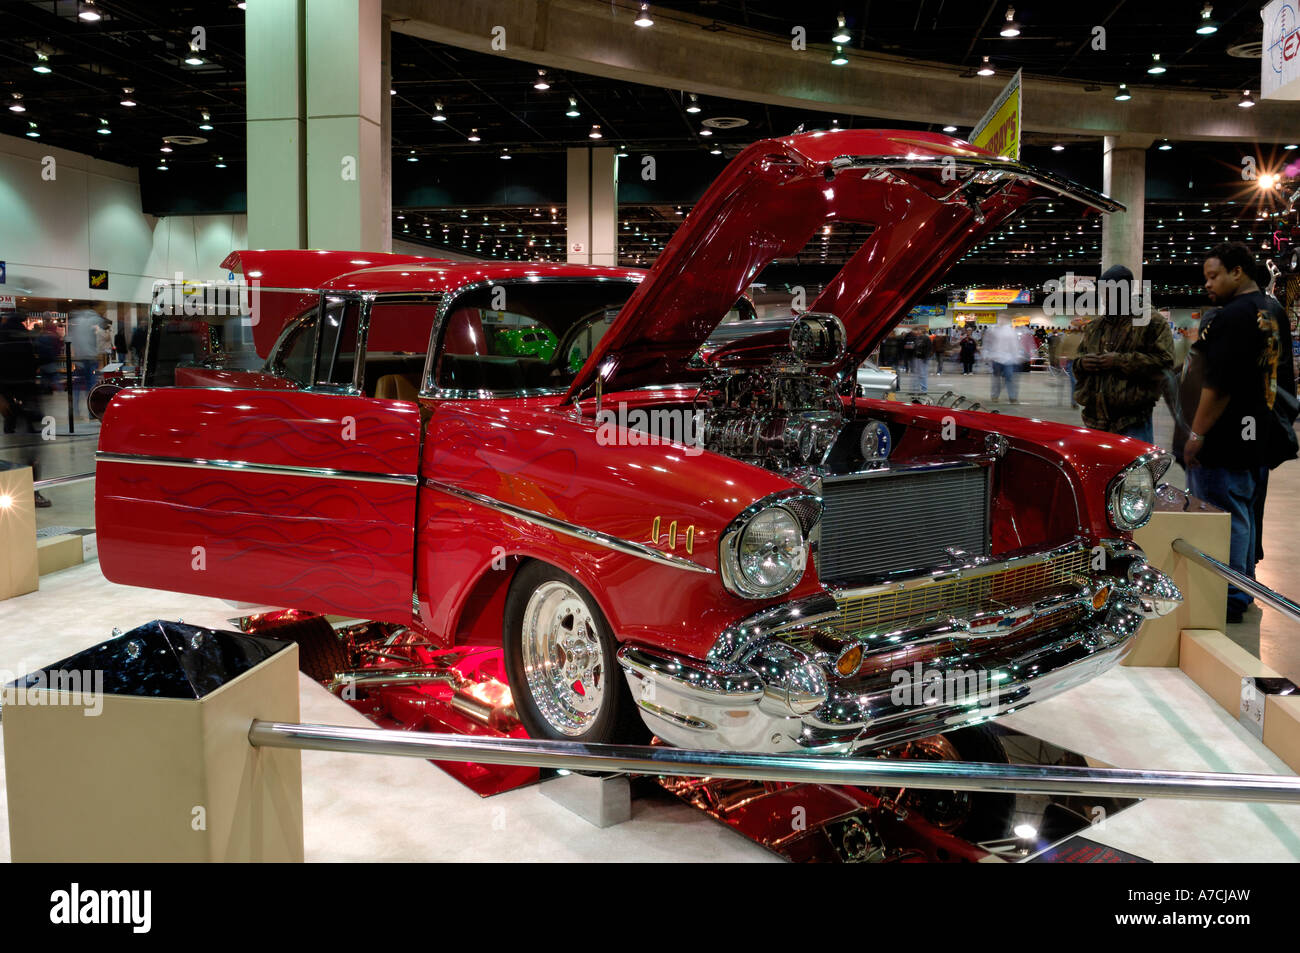 1957 Chevy Bel Air at the 2007 Detroit Autorama hot rod show Stock Photo